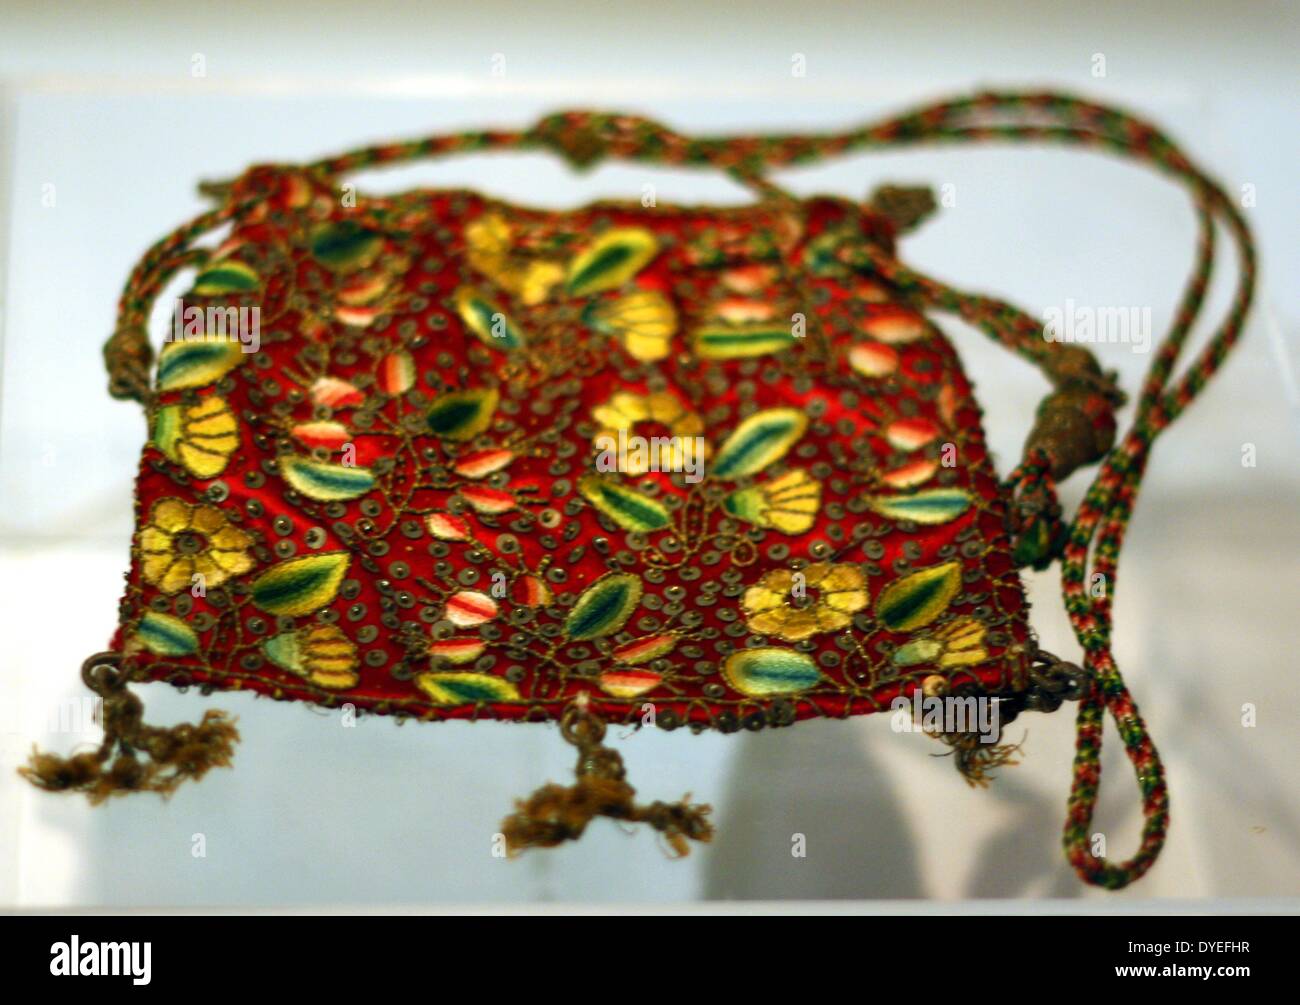 Embroidered Bag or Purse 1620 A.D. Stock Photo